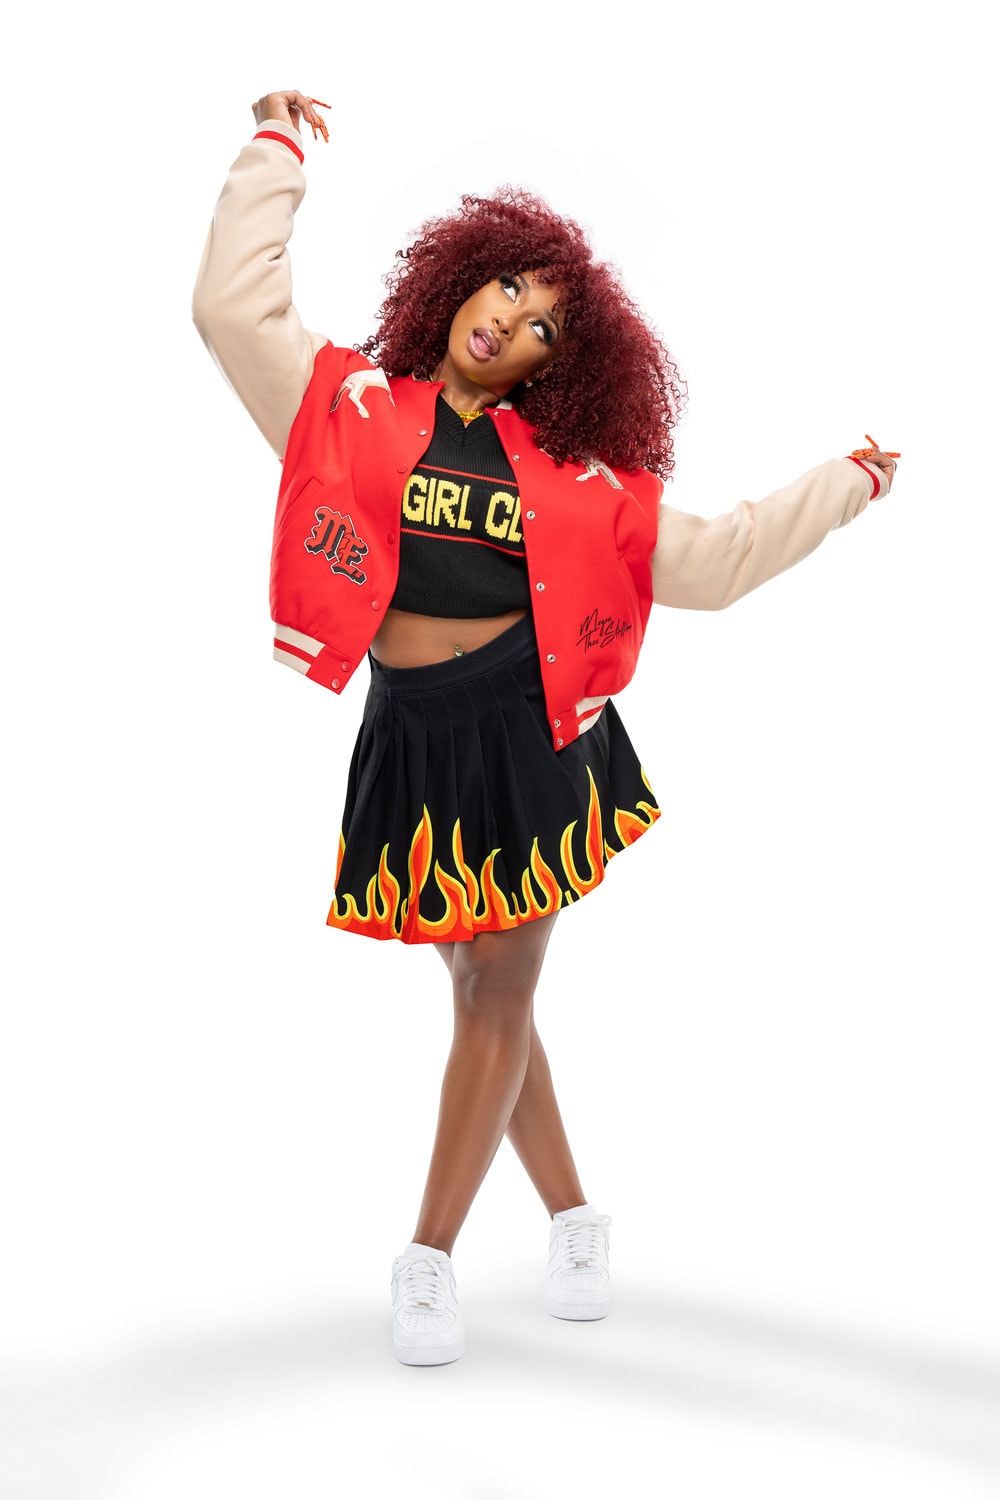 flamin' hot megan thee stallion melody ehsani hbcu historical black colleges and universities homecoming season texas southern university chef scotty fashion 